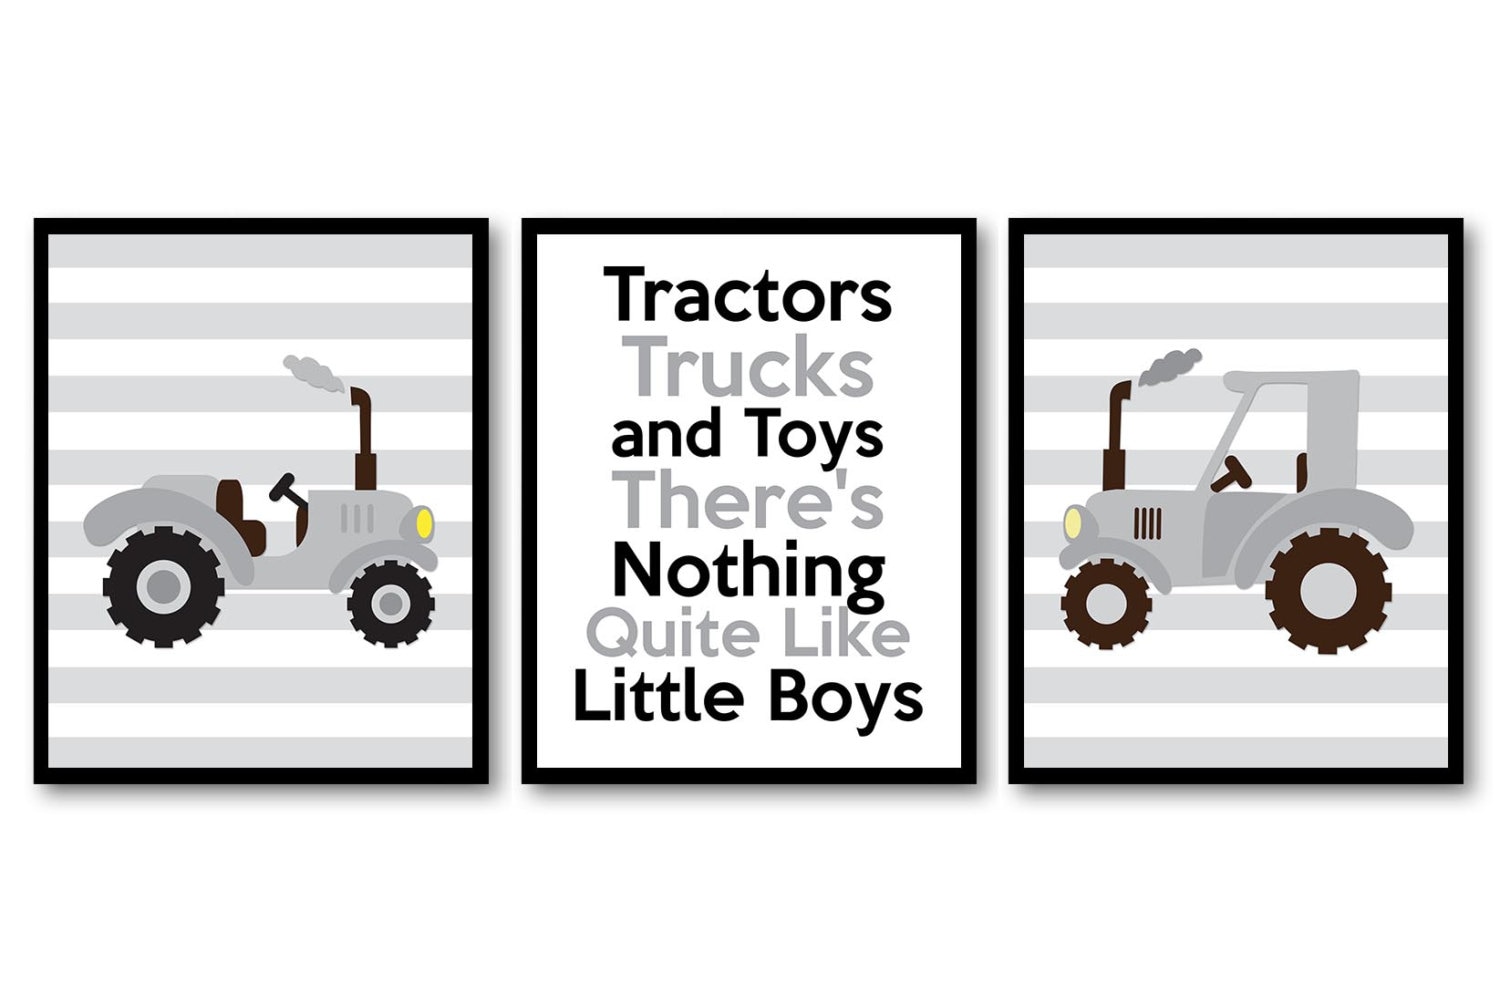 Tractor Nursery Art Tractors Trucks and Toys Theres Nothing Quite Like Little Boys Prints Set of 3 B